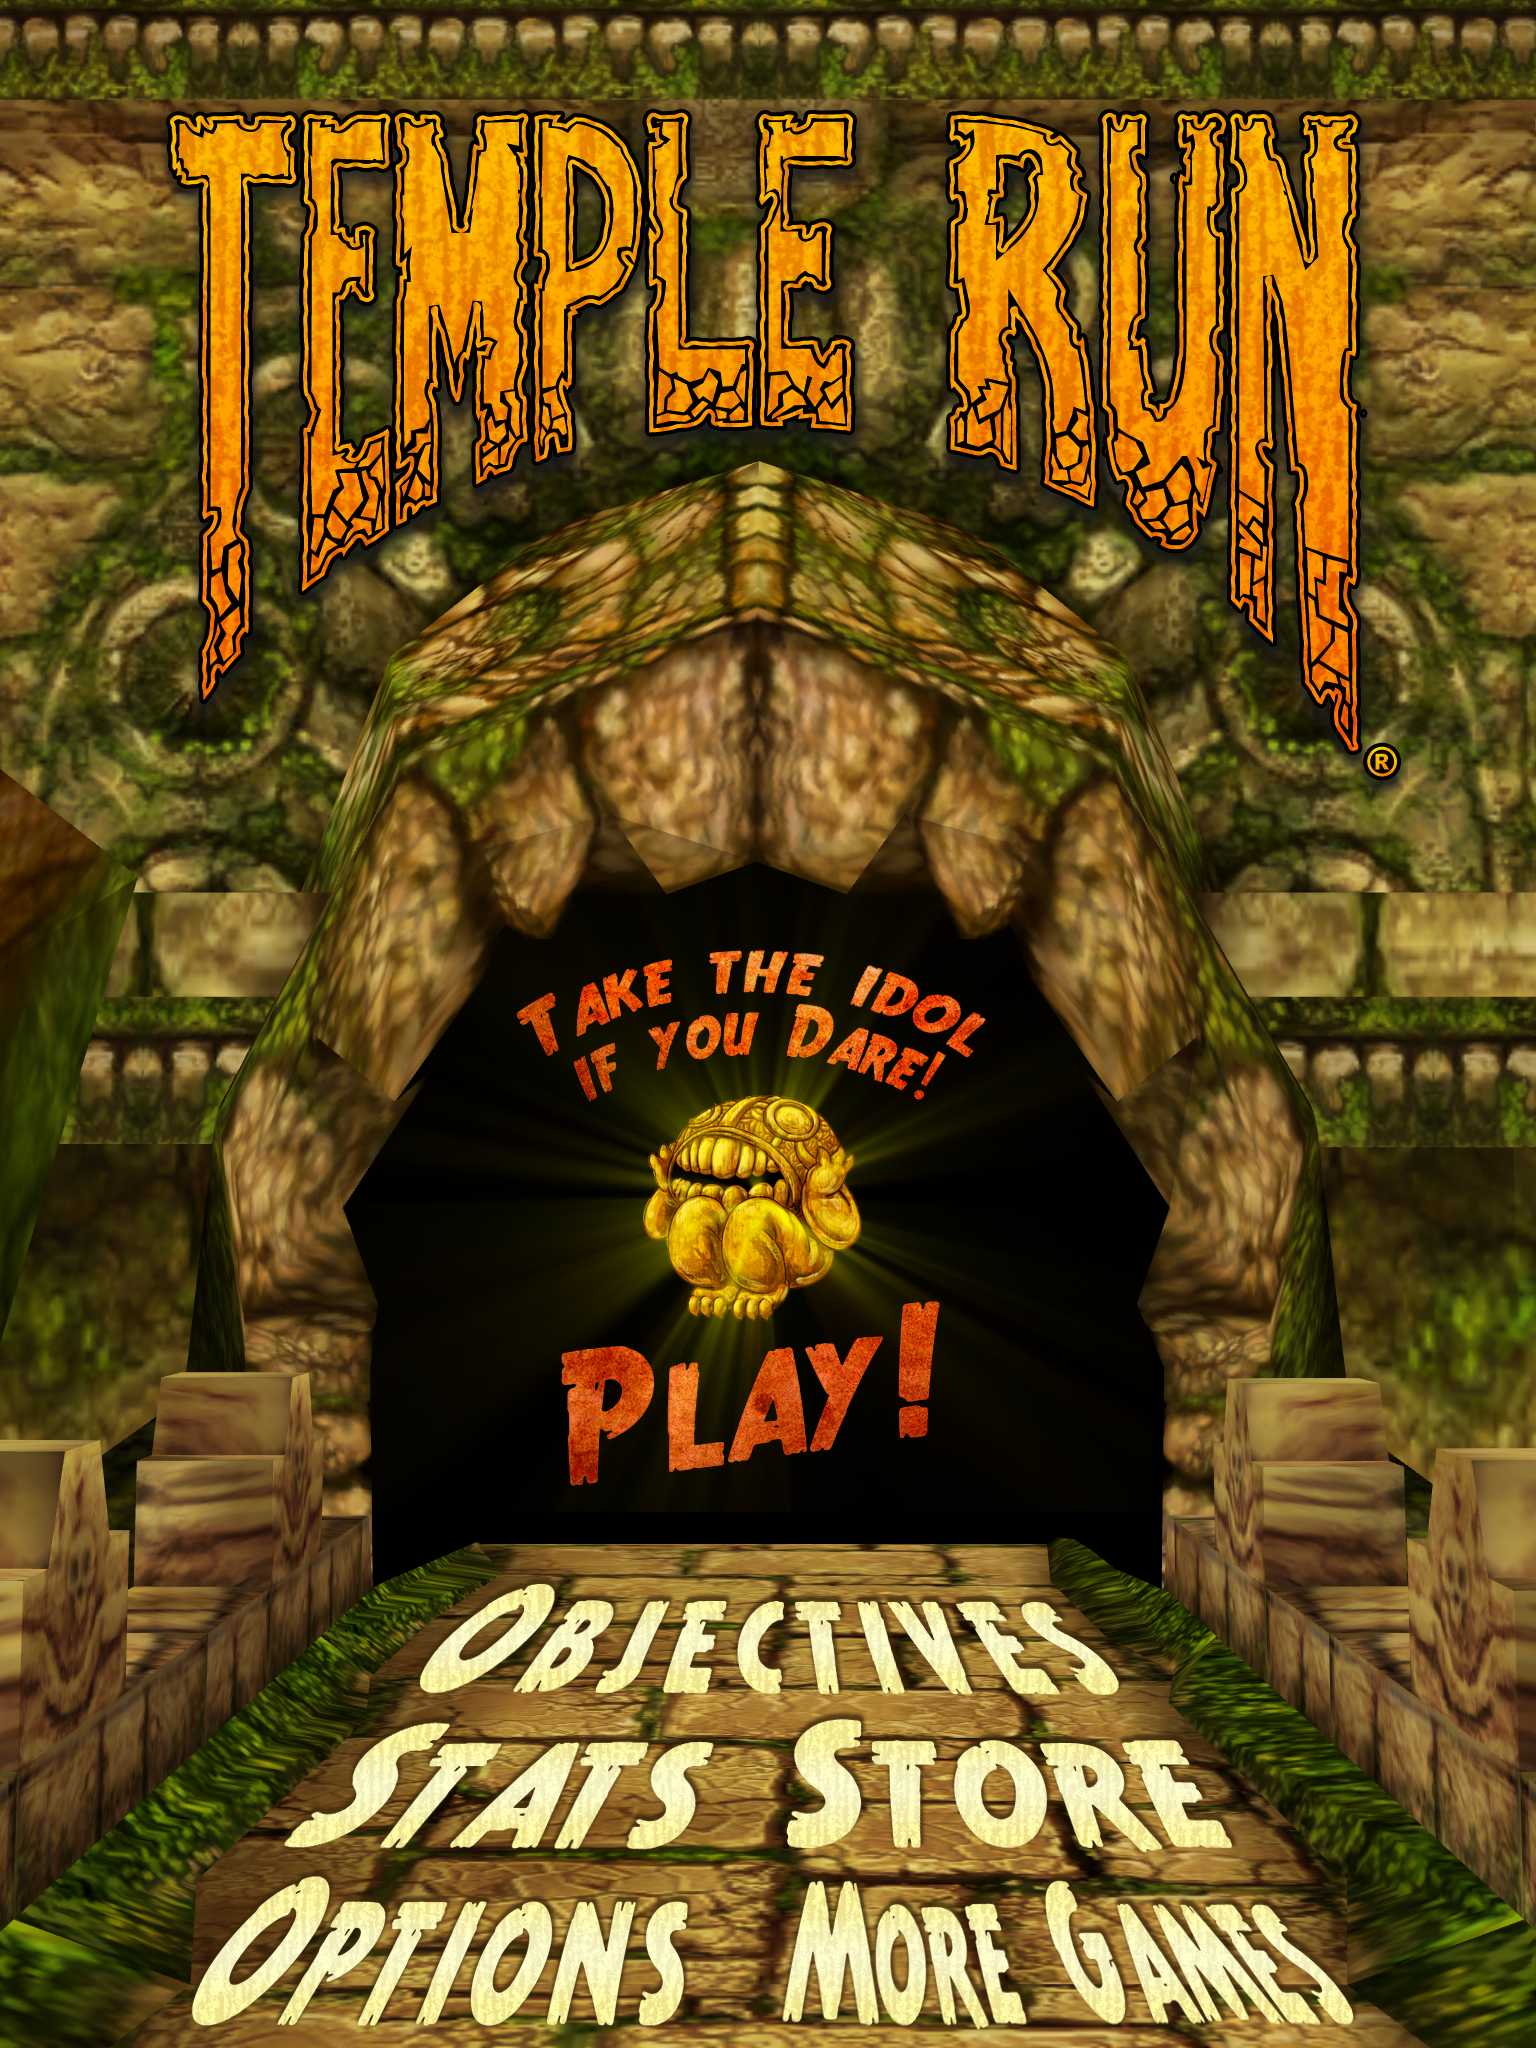 Temple Run' Game Creators Find Strength in Small Size